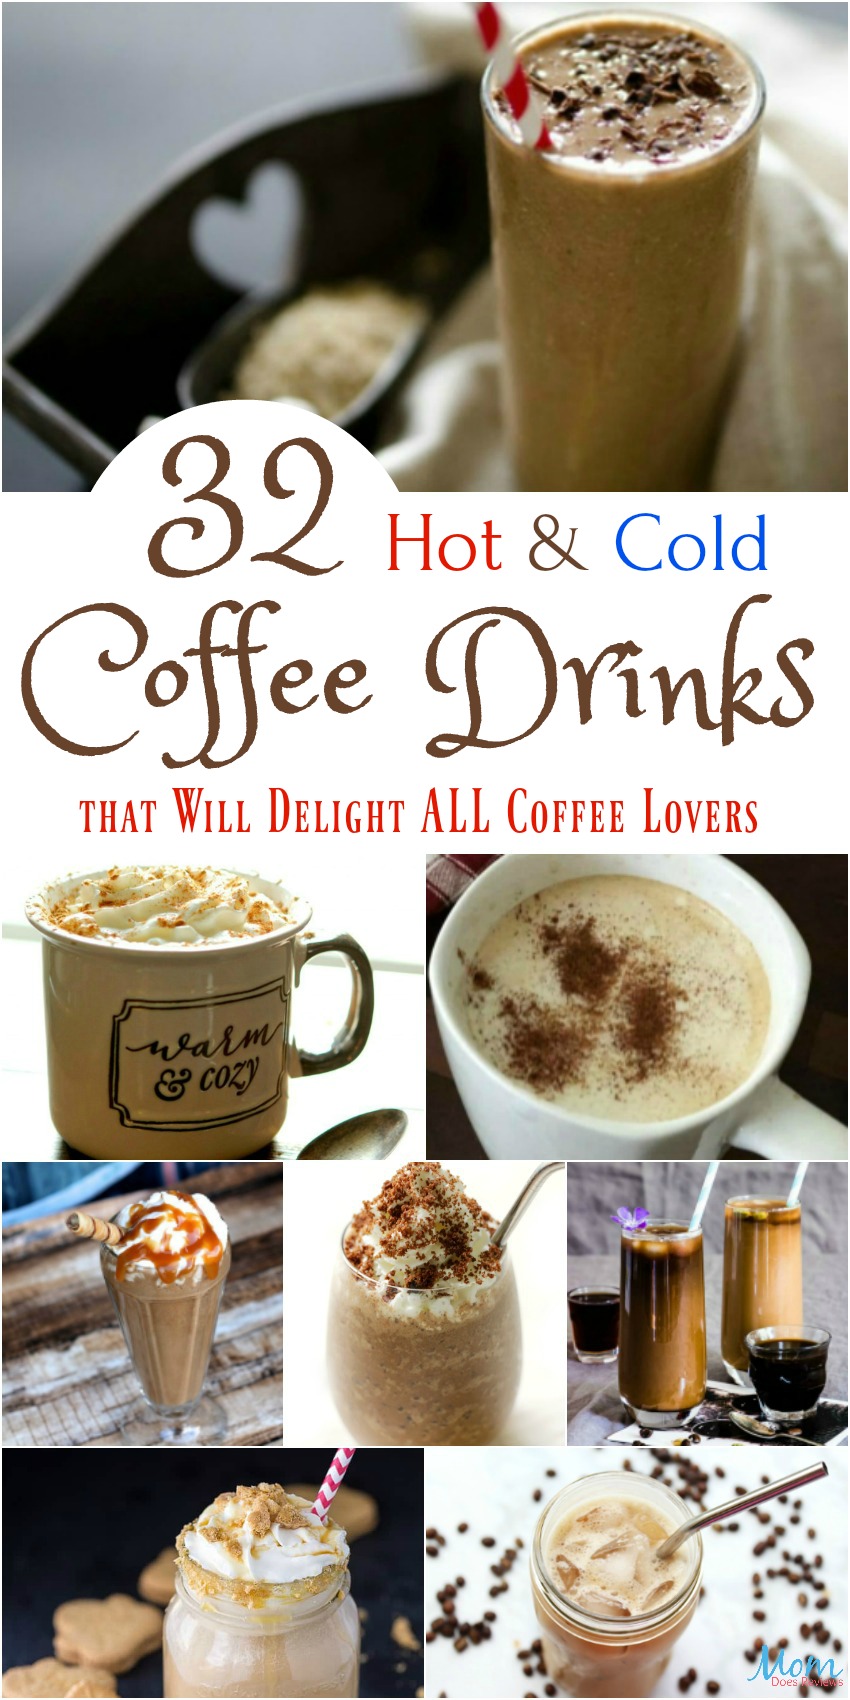 32 Hot & Cold Coffee Drinks that Will Delight ALL Coffee Lovers